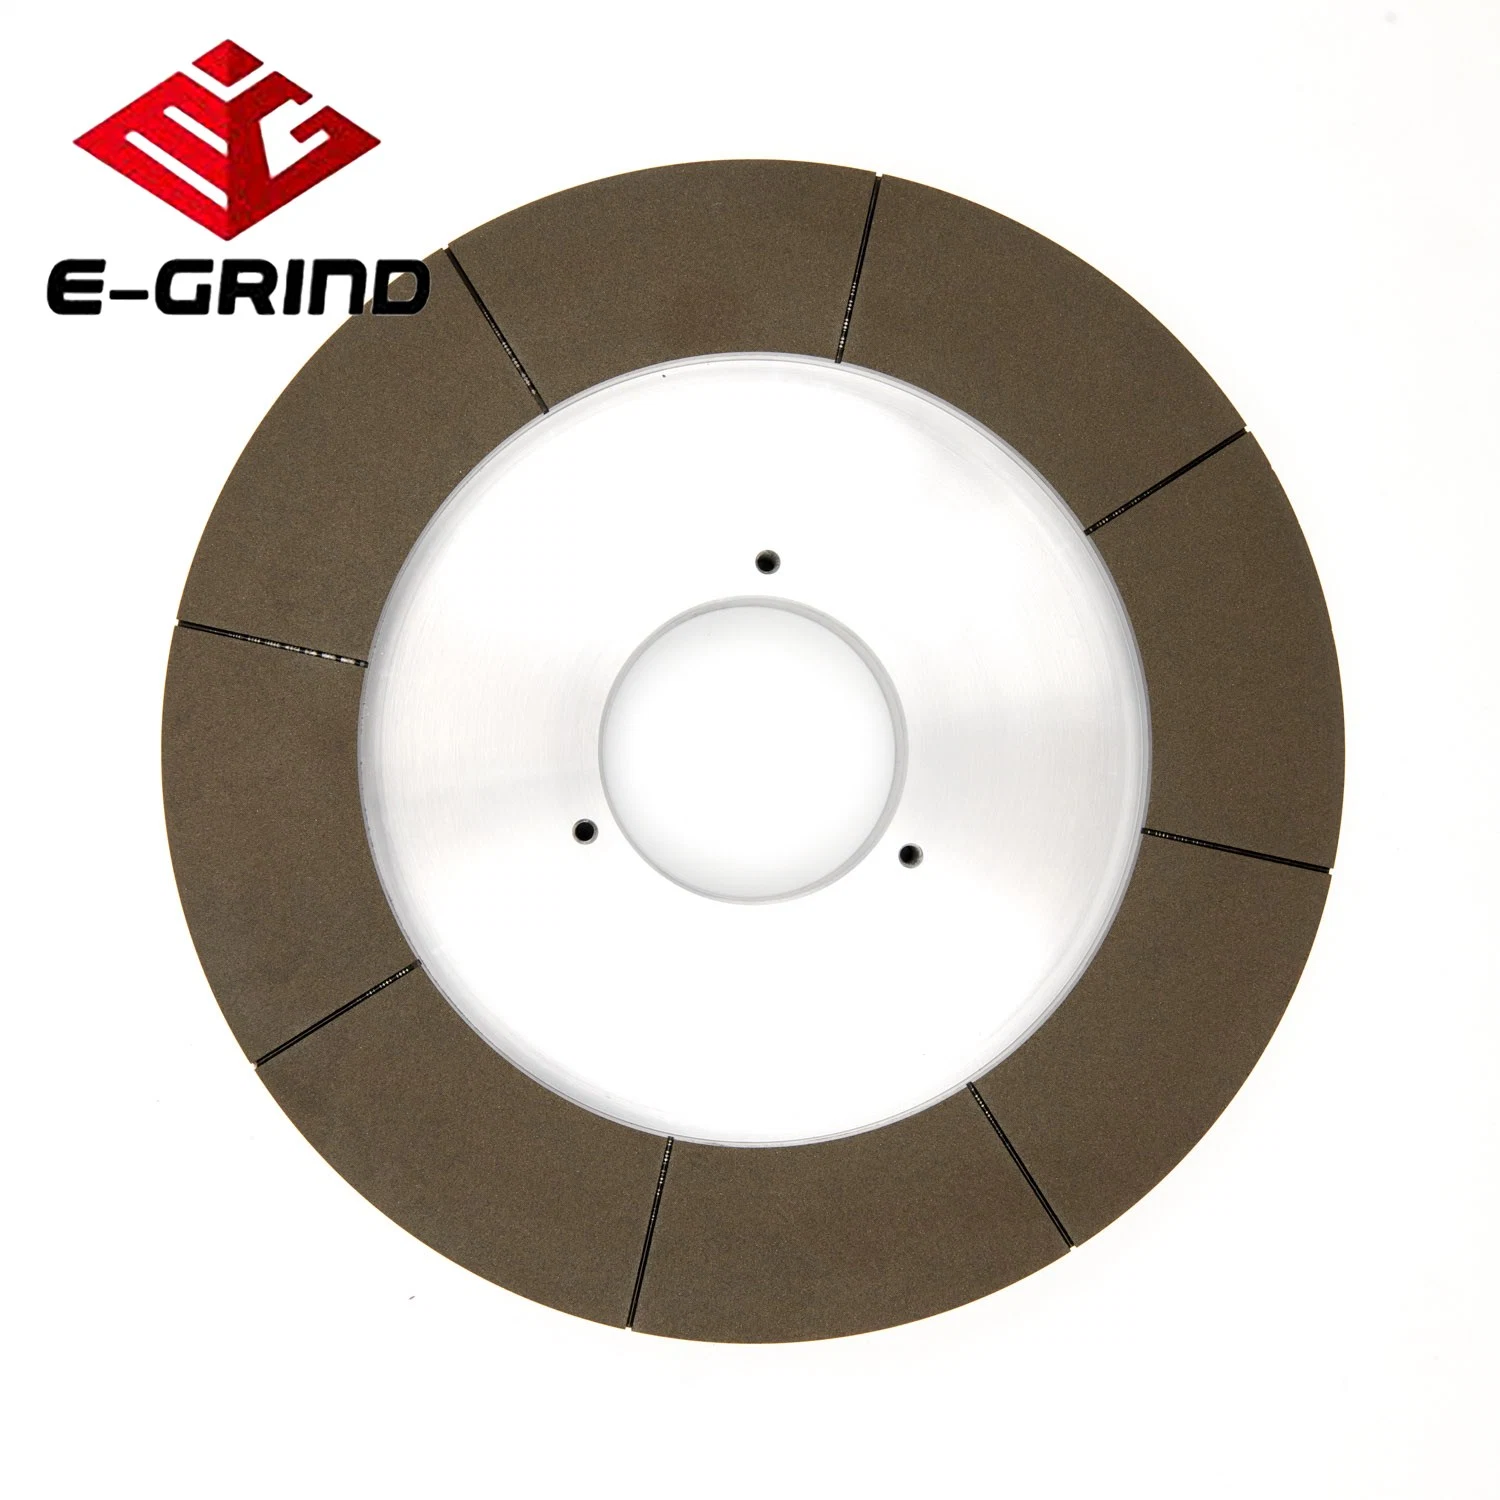 Diamond&CBN Grinding Wheels for Metal Materials